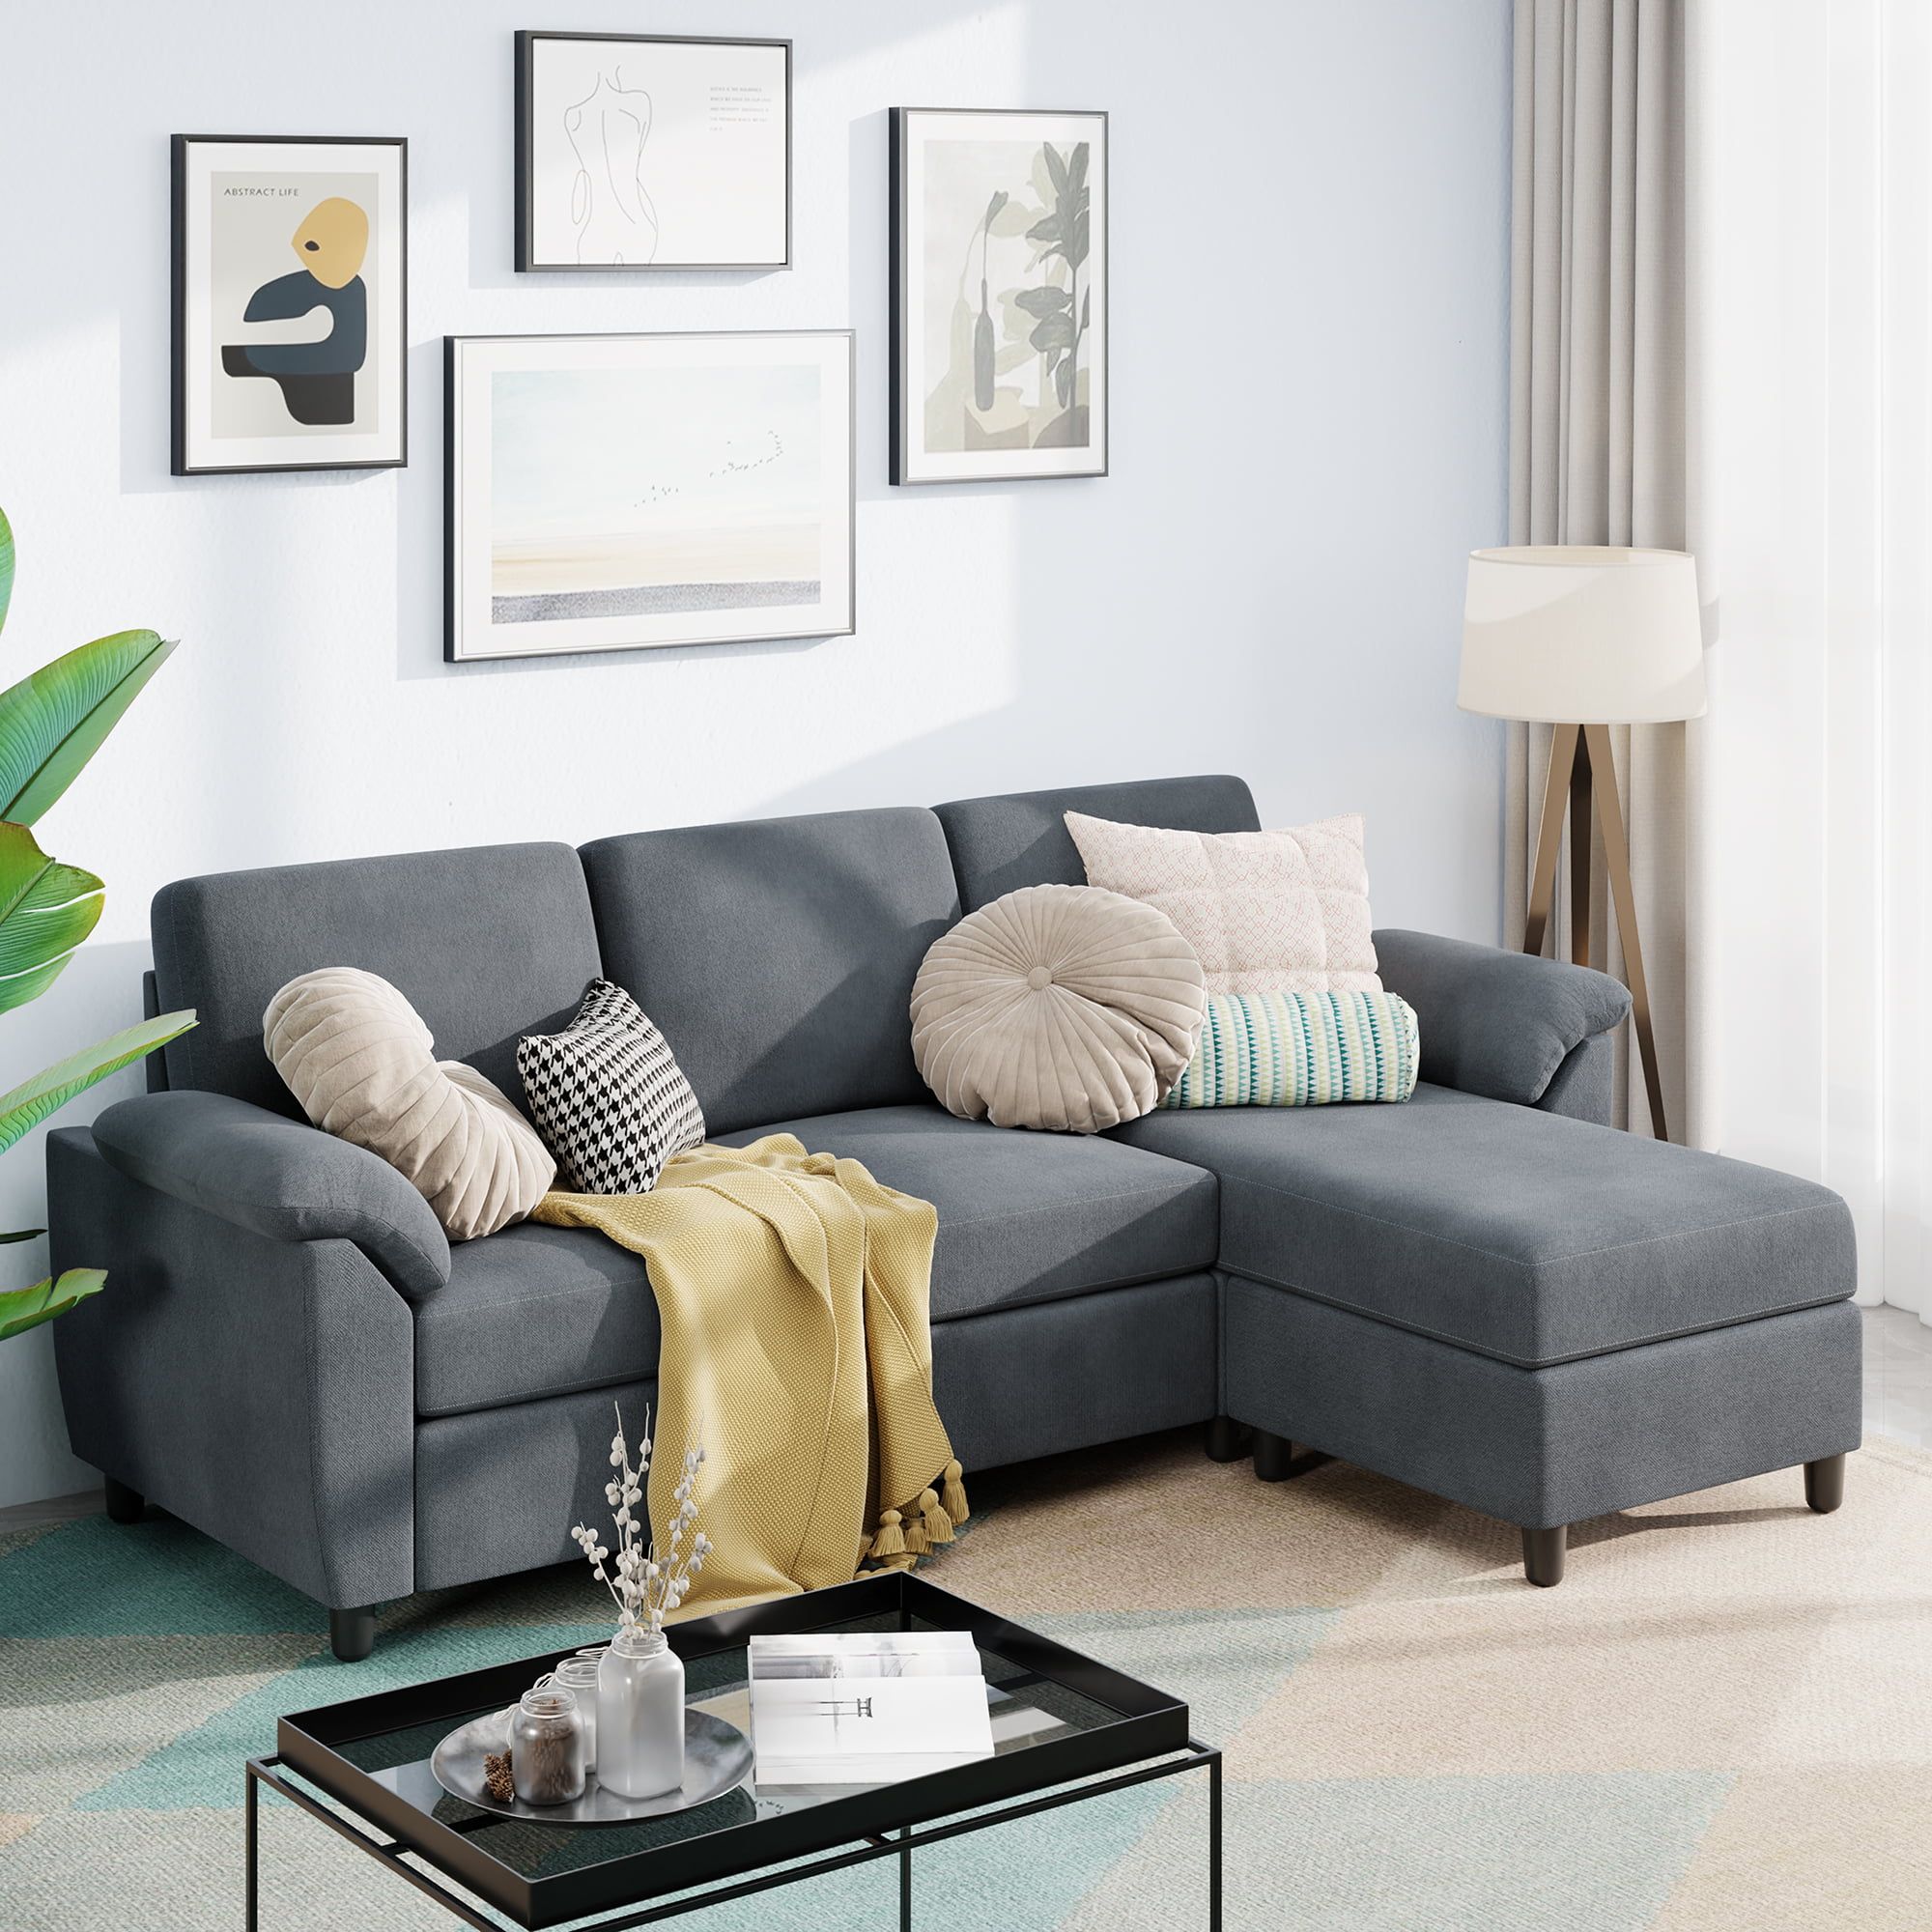 Sobaniilo 79" Convertible Sectional Sofa Couch, 3 Seat L Shaped Sofa With  Removable Pillows Linen Fabric Small Couch Mid Century For Living Room,  Apartment And Office (Gray) – Walmart With Regard To Convertible Sectional Sofa Couches (View 6 of 15)